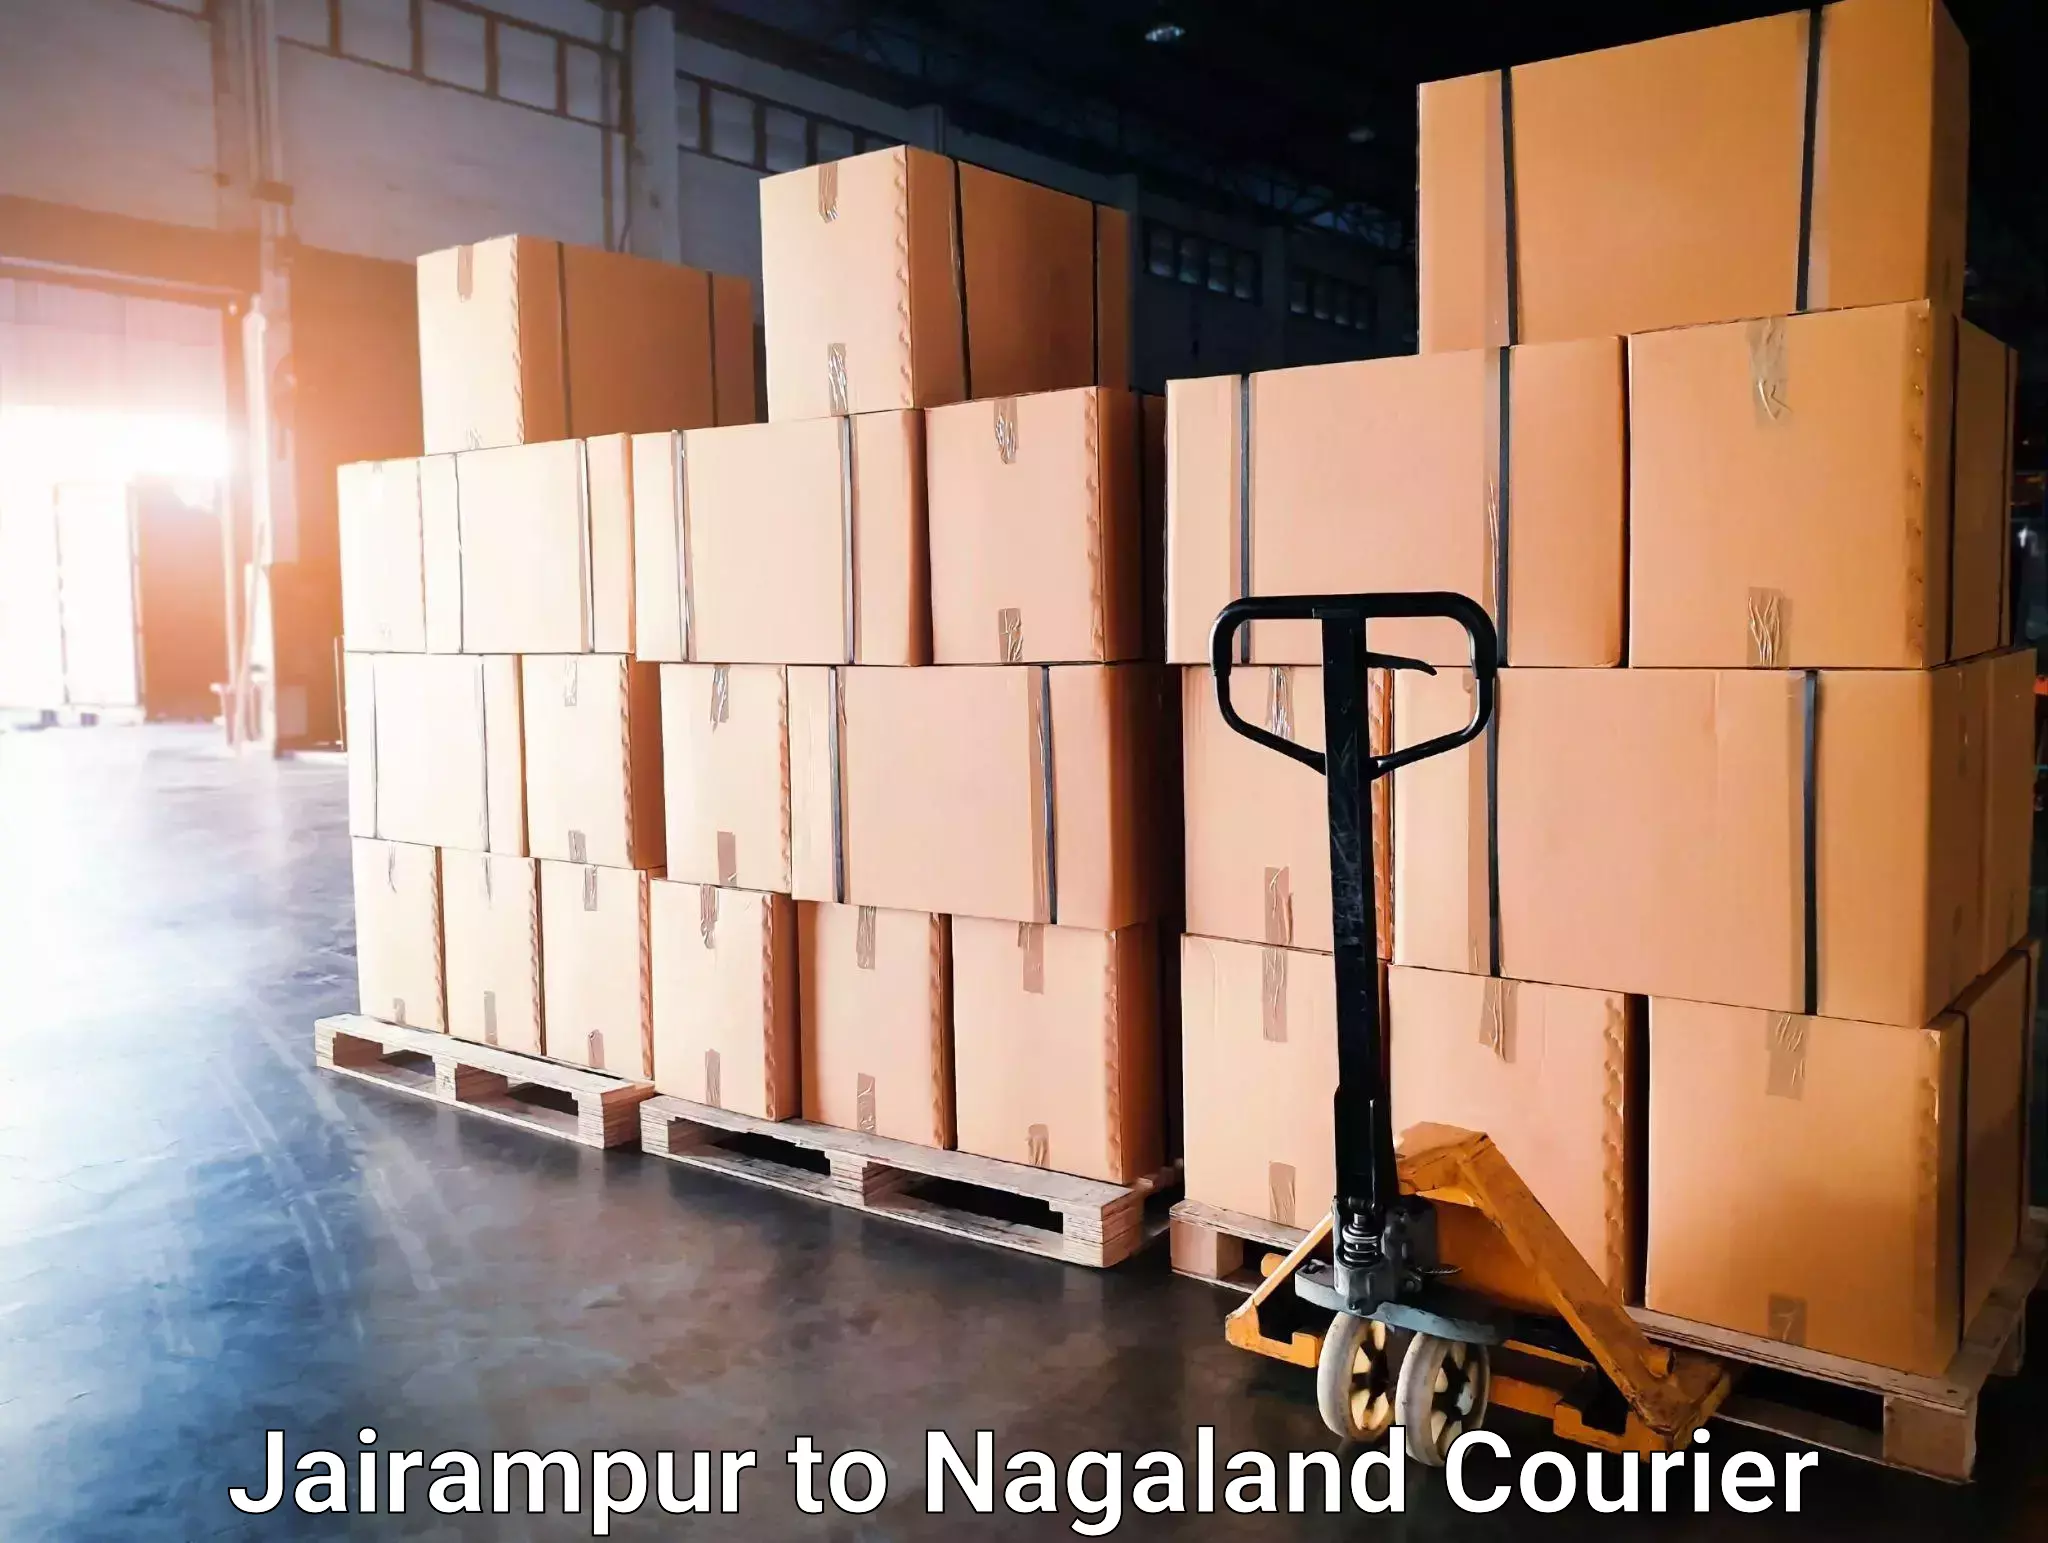 Overnight delivery services Jairampur to Nagaland